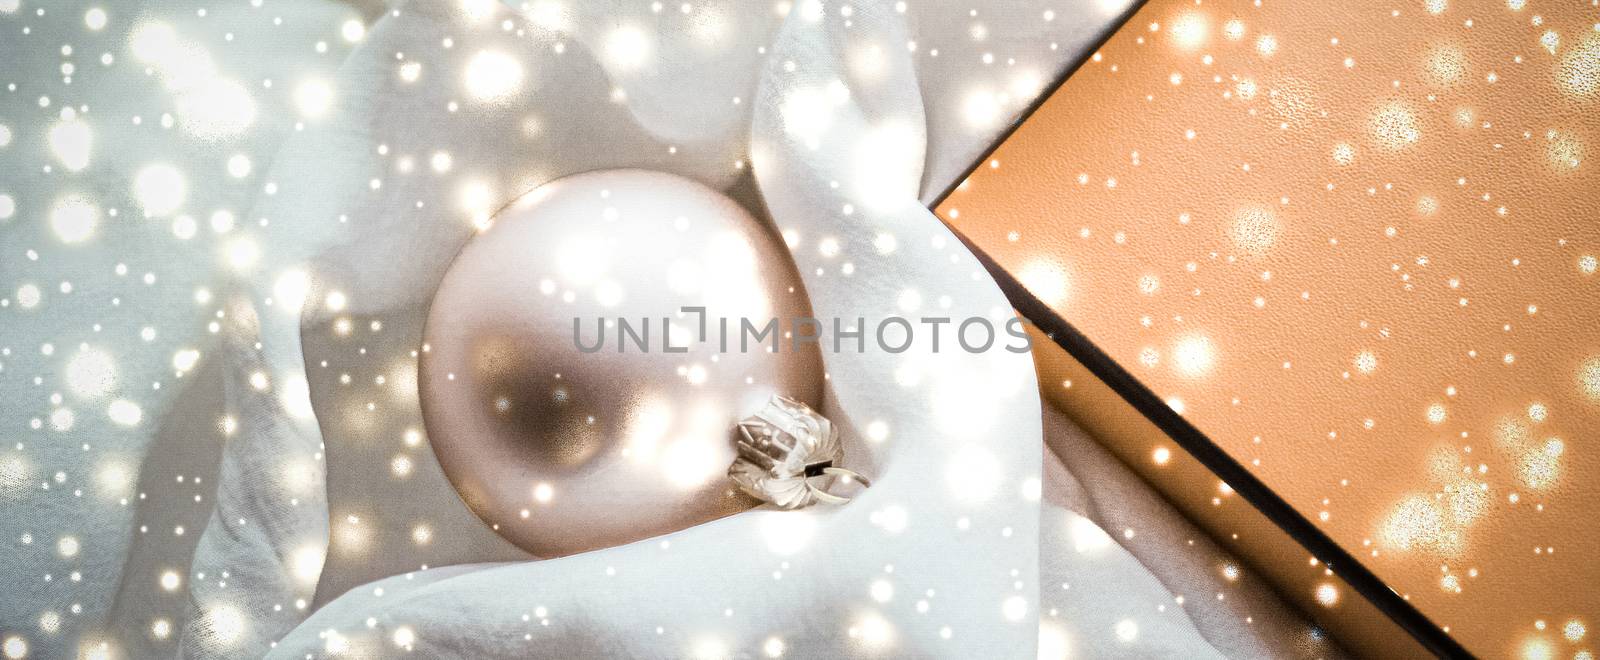 Holidays branding, glamour and decoration concept - Christmas magic holiday background, festive baubles, yellow vintage gift box and golden glitter as winter season present for luxury brand design